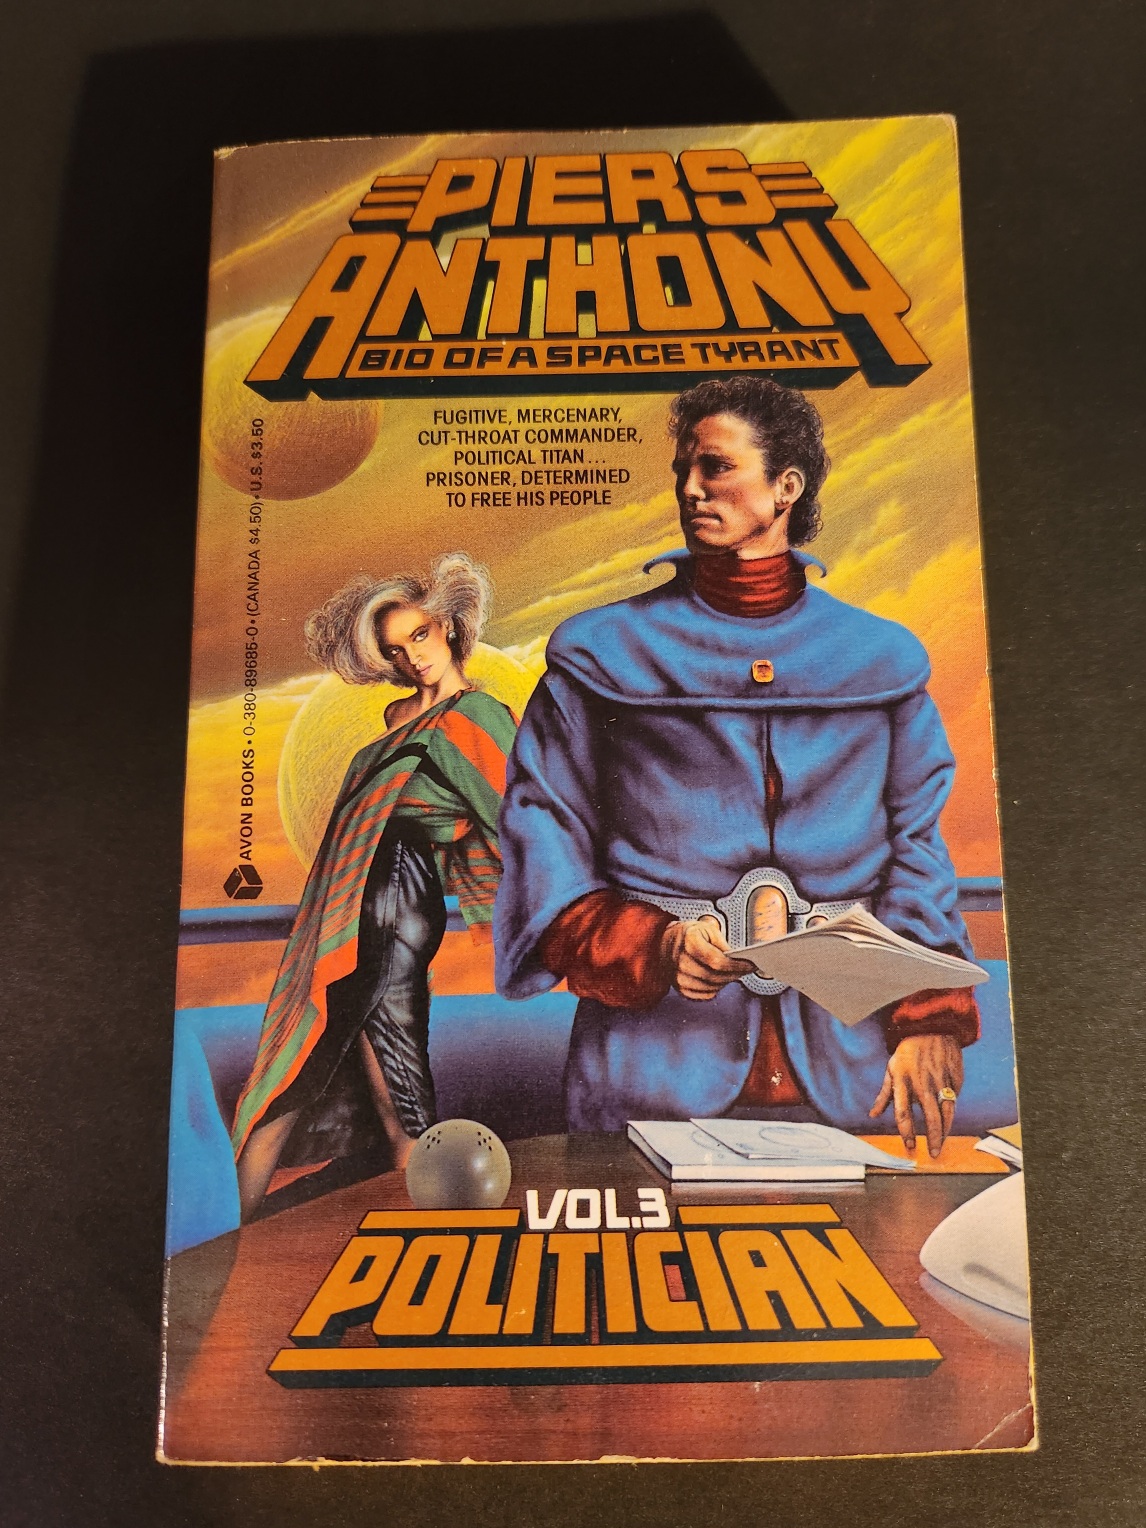 Bio Of a Space Tyrant by Piers Anthony Vol 3 Politician 1985